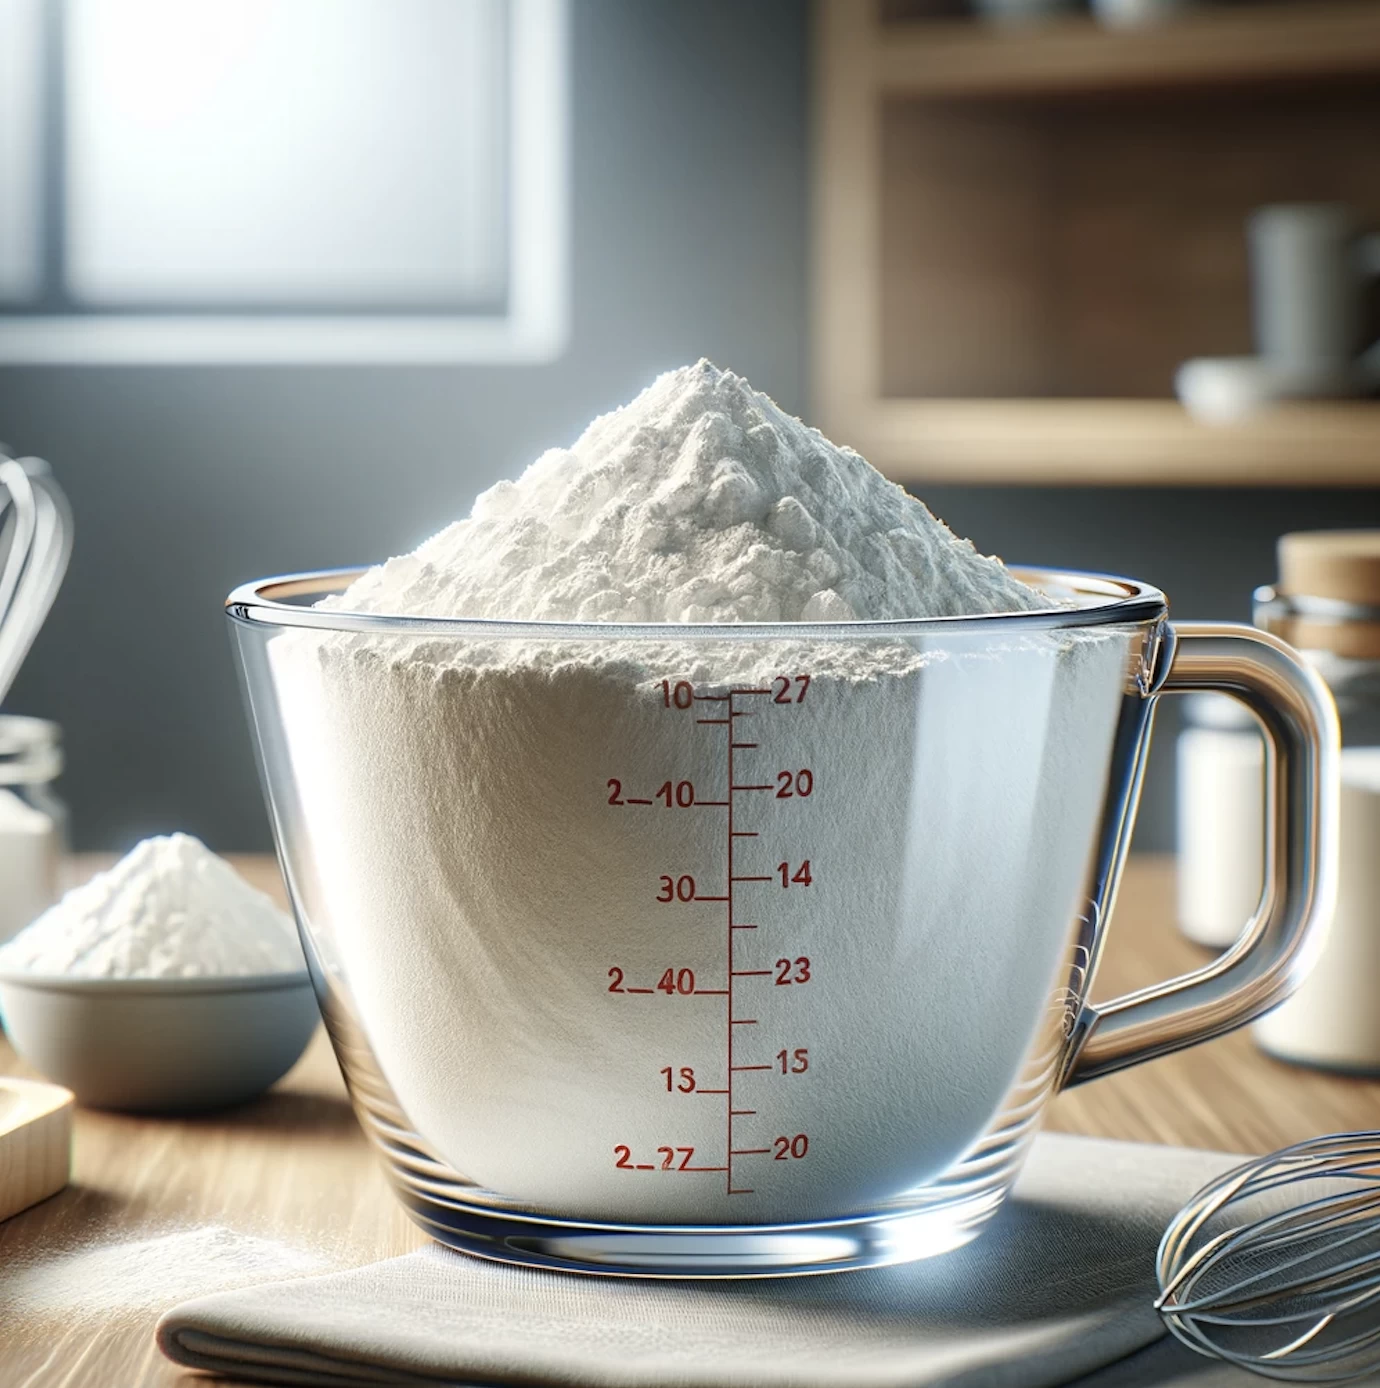 350 grams of flour in cups